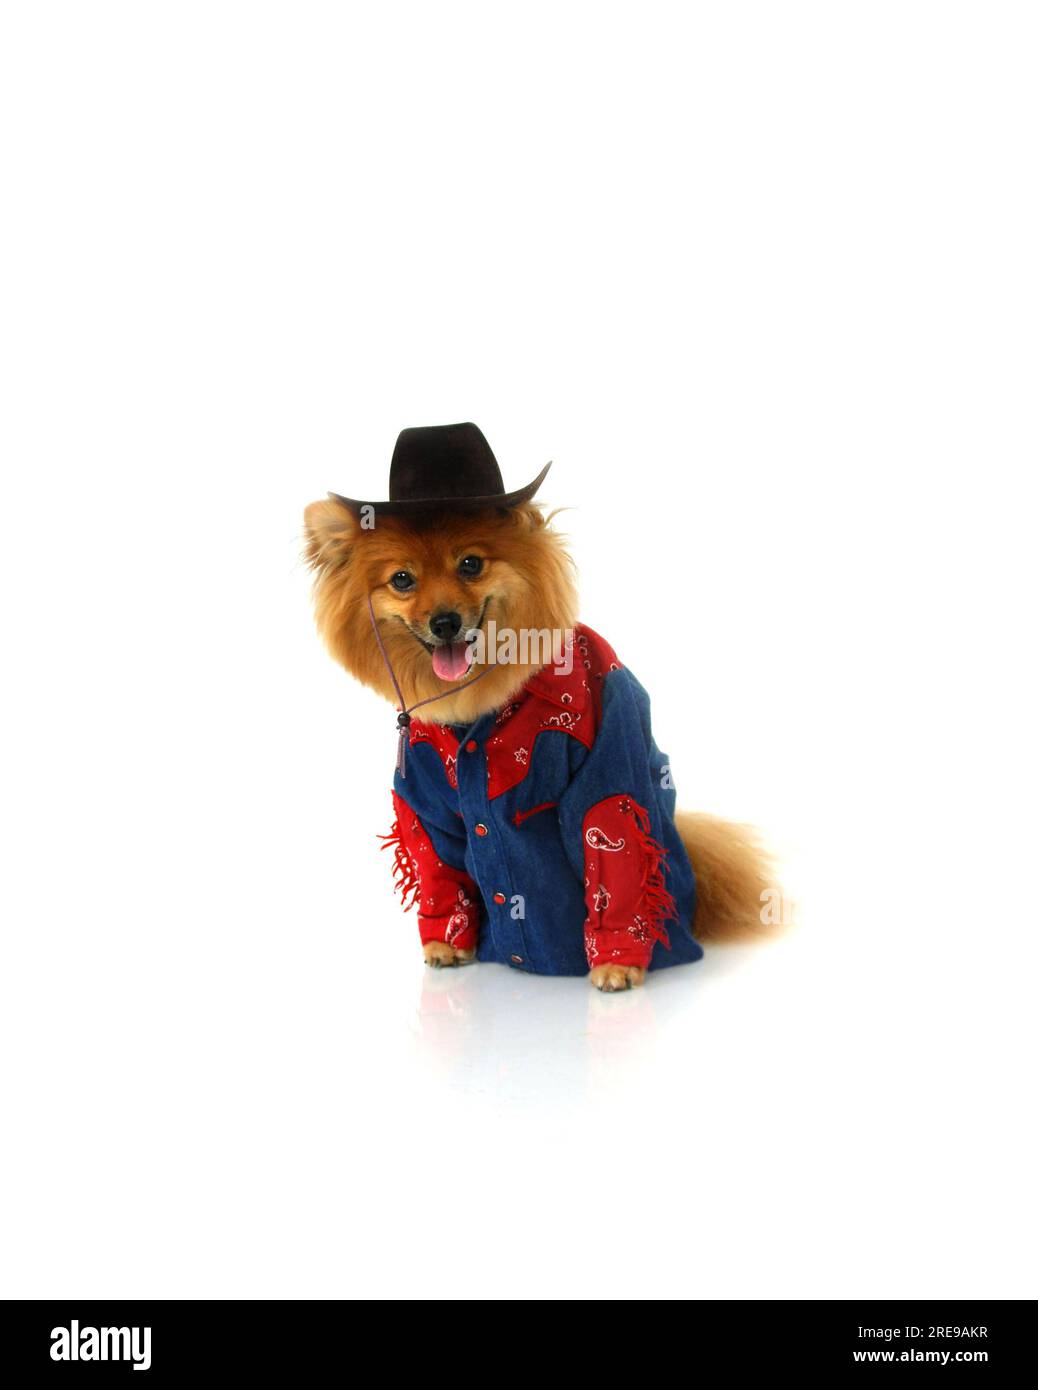 Pomeranian cowboy is wearing a denim and red shirt and a cowboy hat.  He is sitting in an all white room. Stock Photo